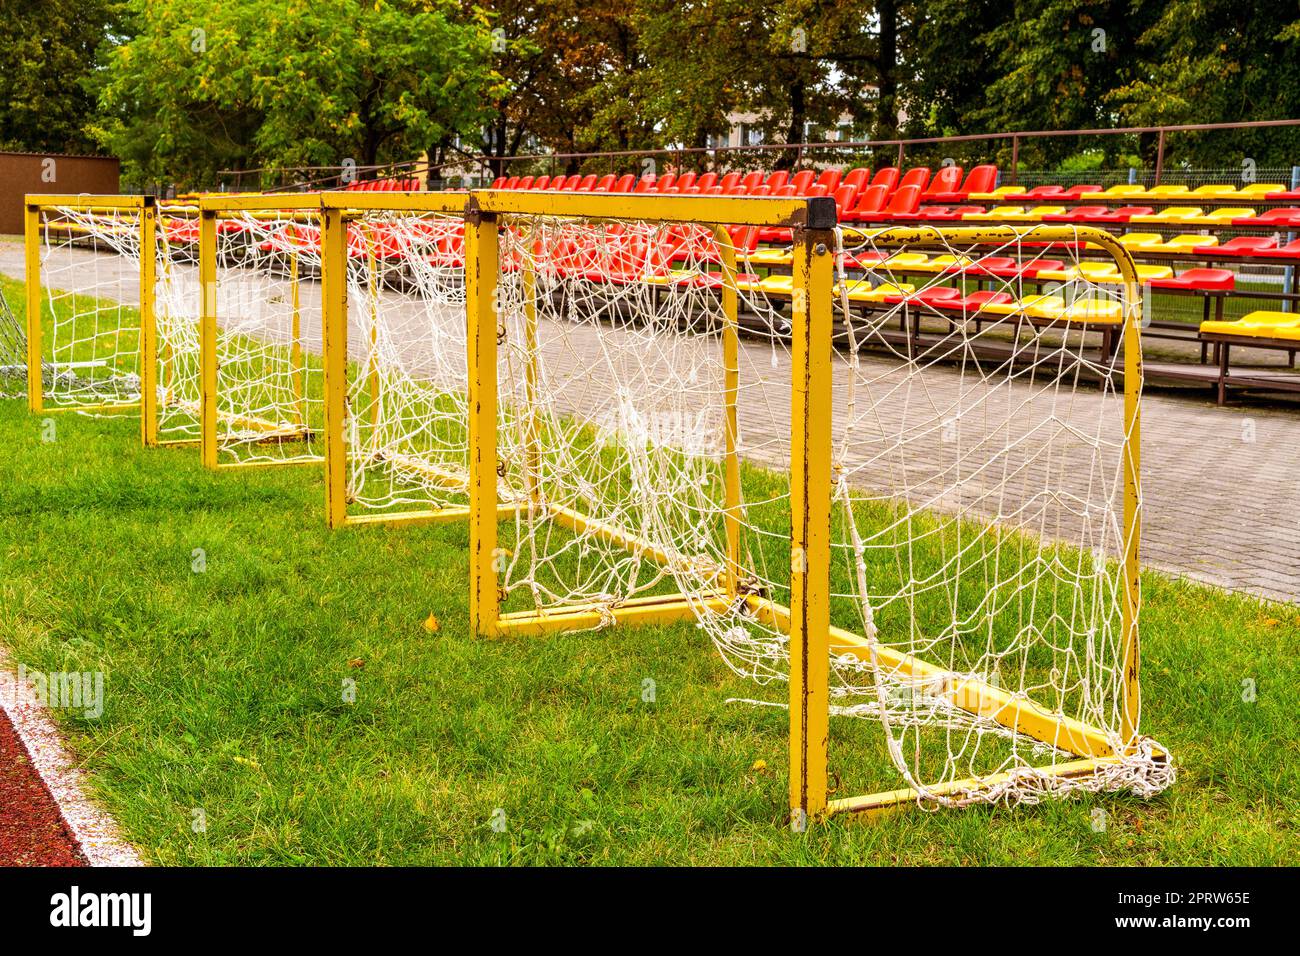 Small soccer goals lined up on a stadium Stock Photo